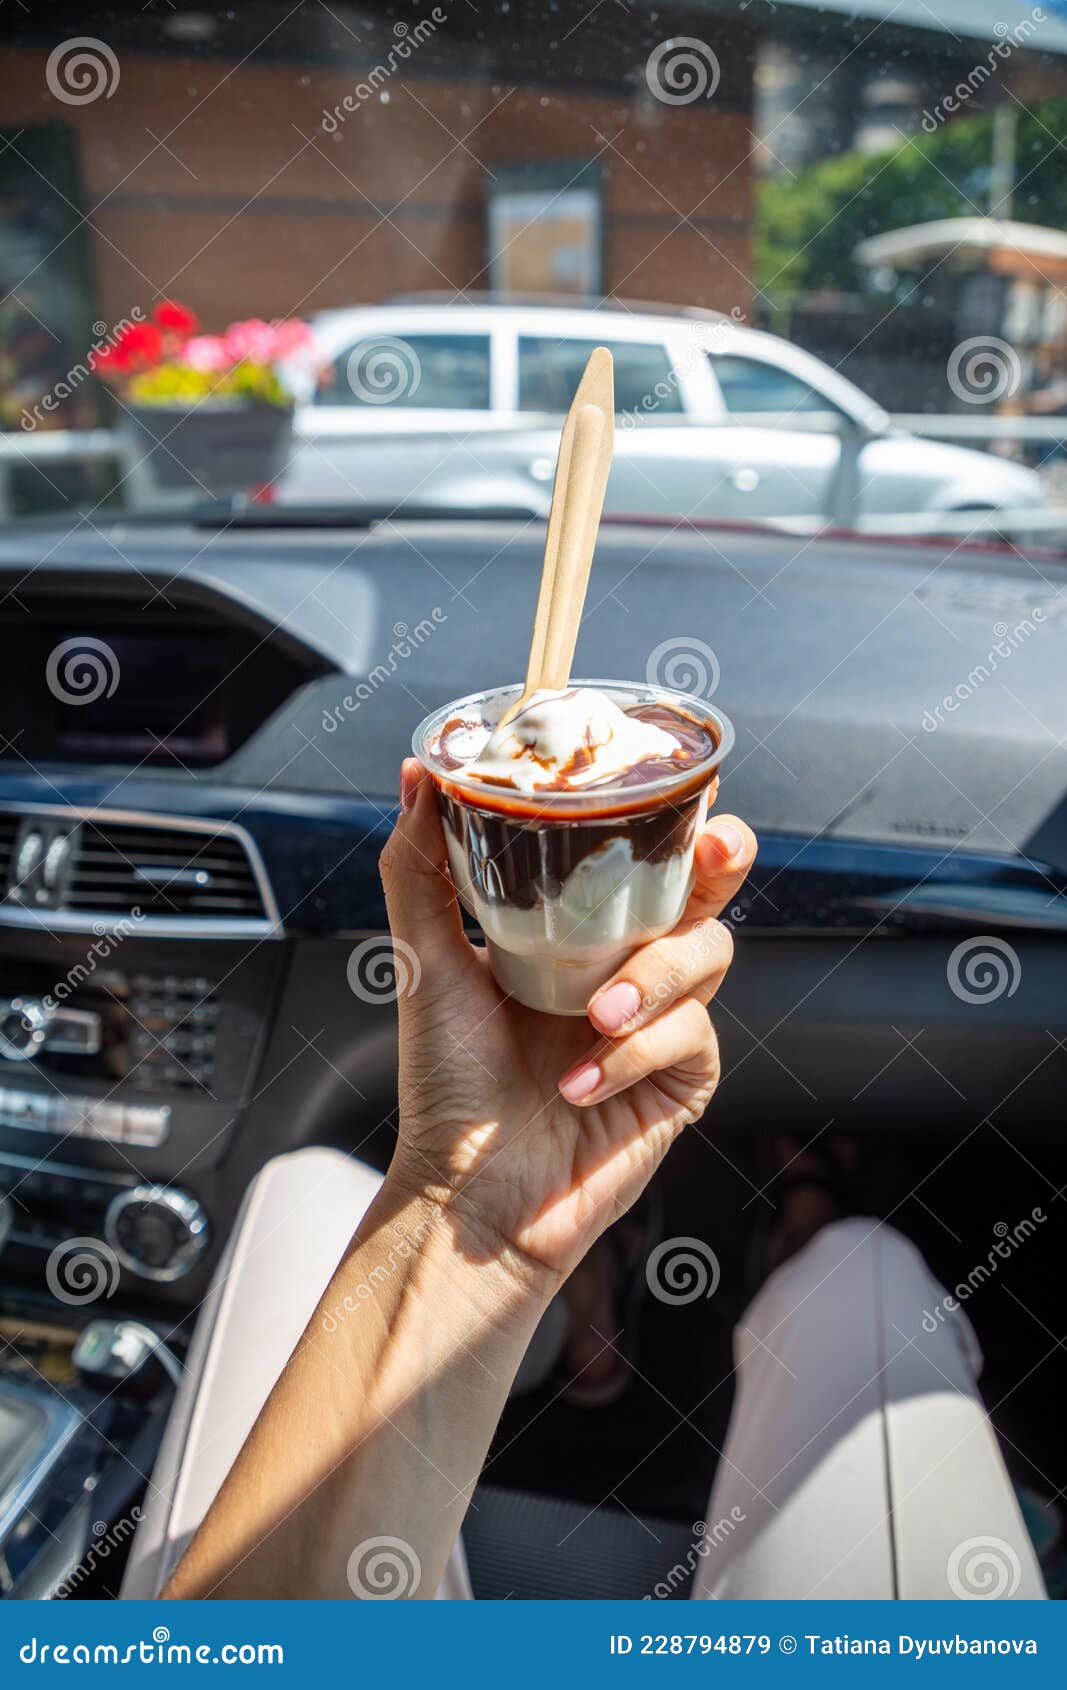 woman holding the mcdonalds mcflurry ice cream with chocolate in a car after drive thru. drive thru concept